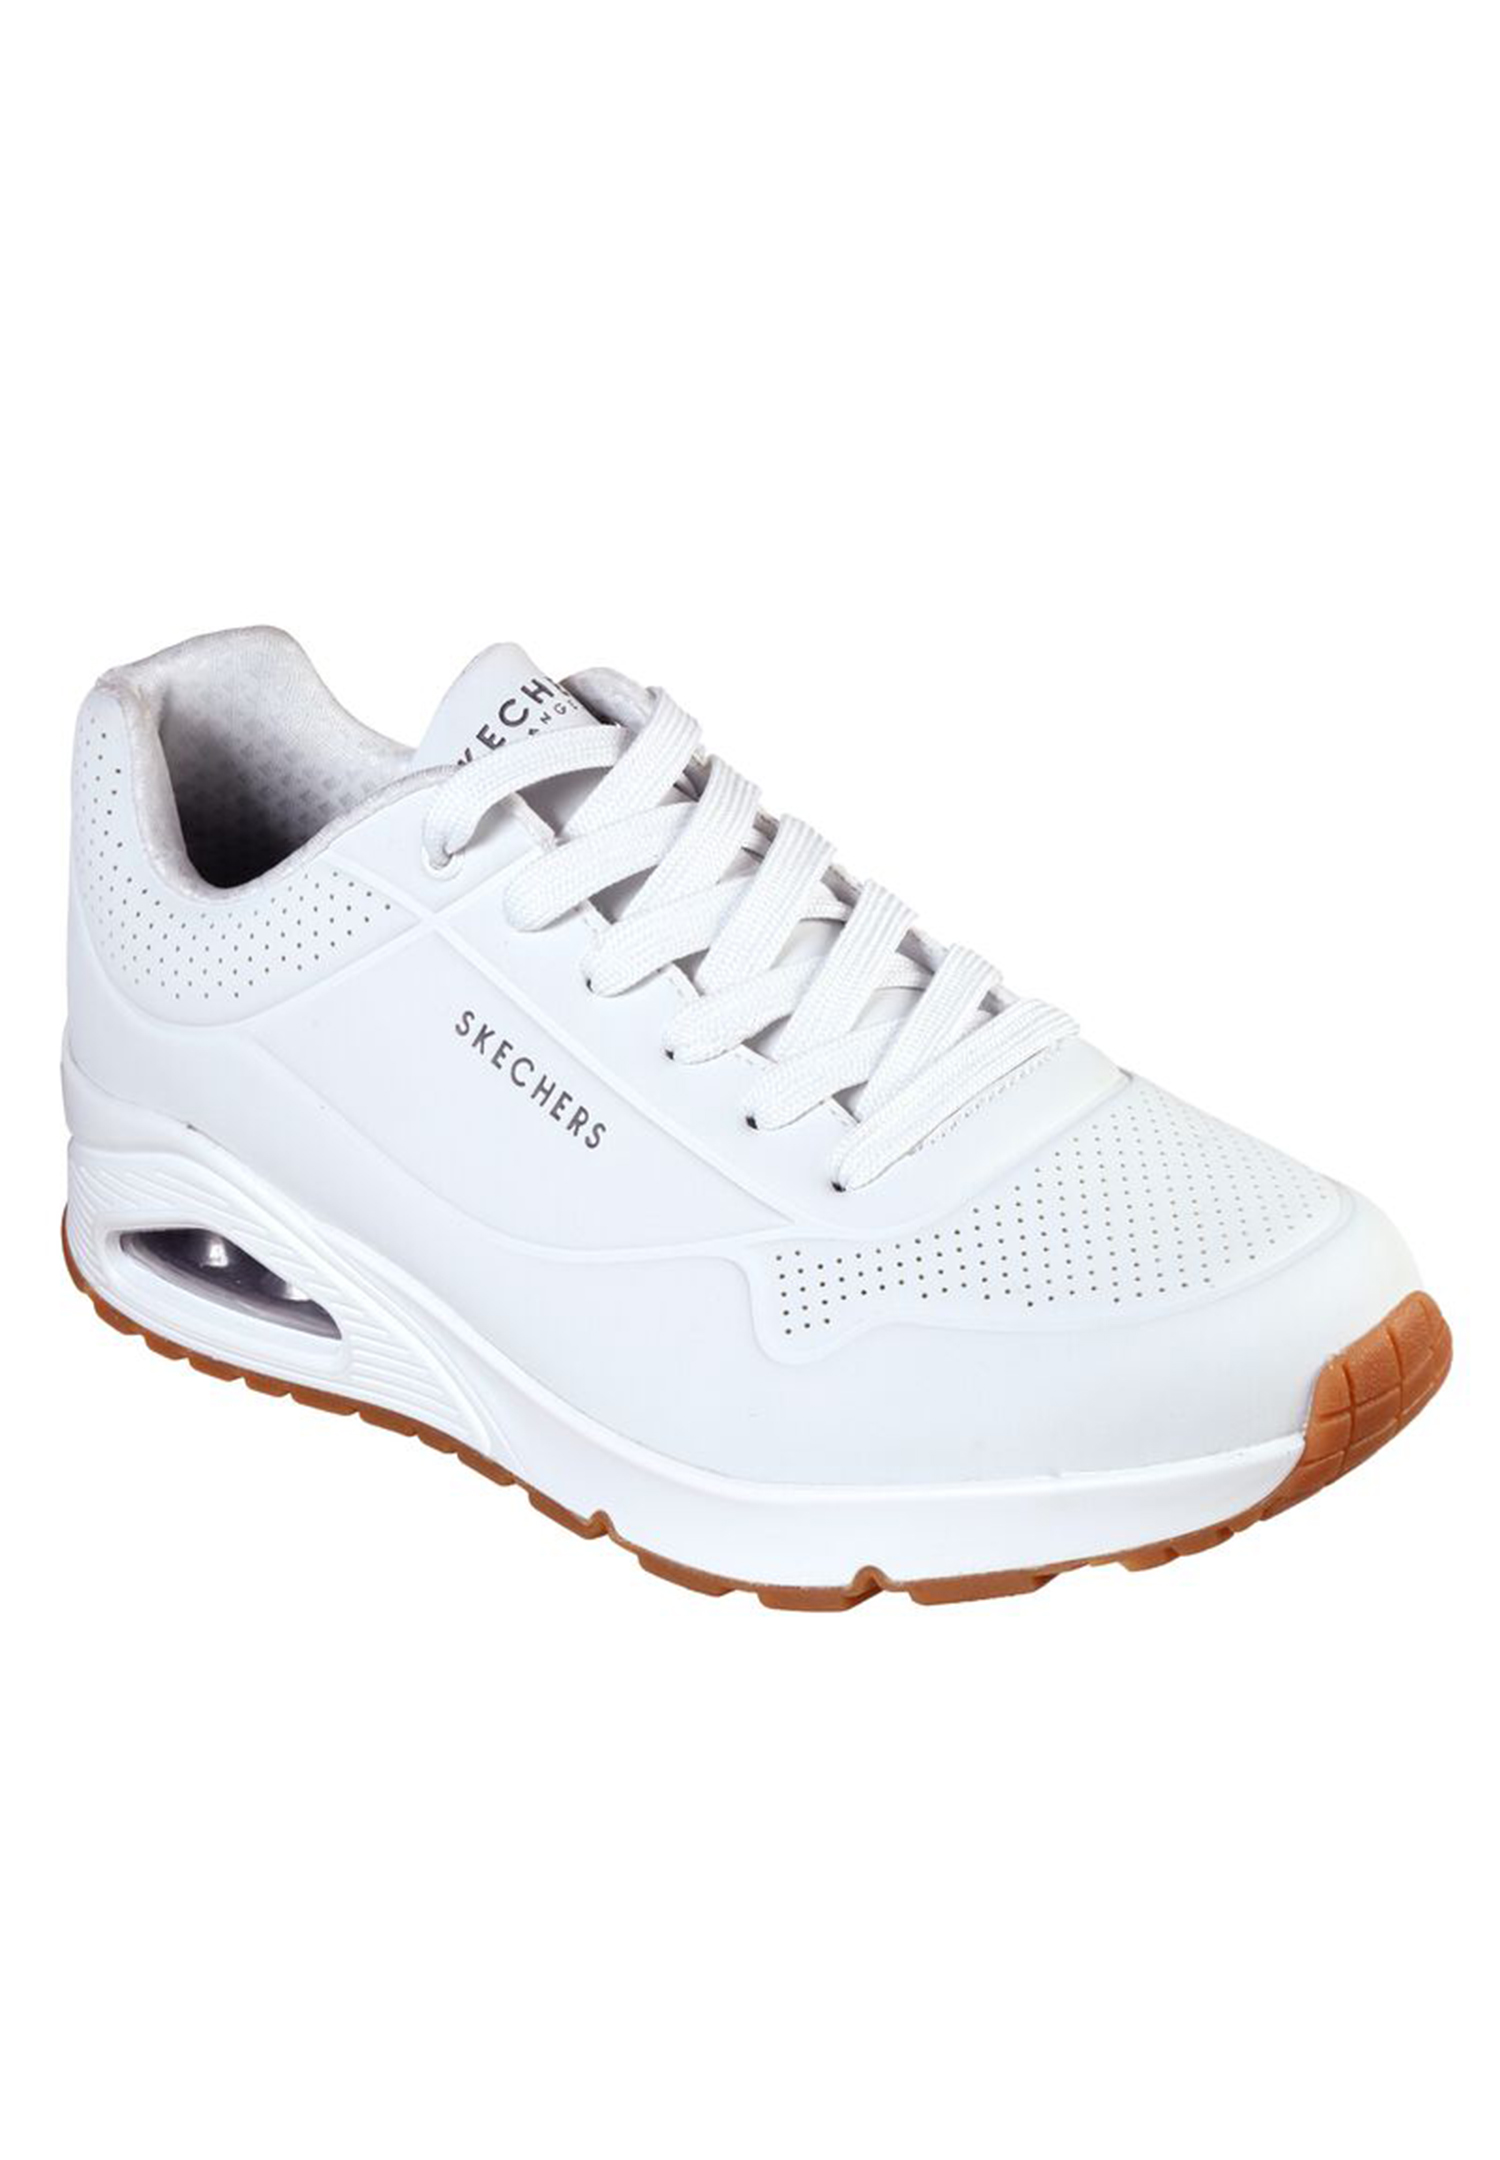 Skechers Mens Sport Casual UNO STAND ON AIR Sneakers Men 52458 white